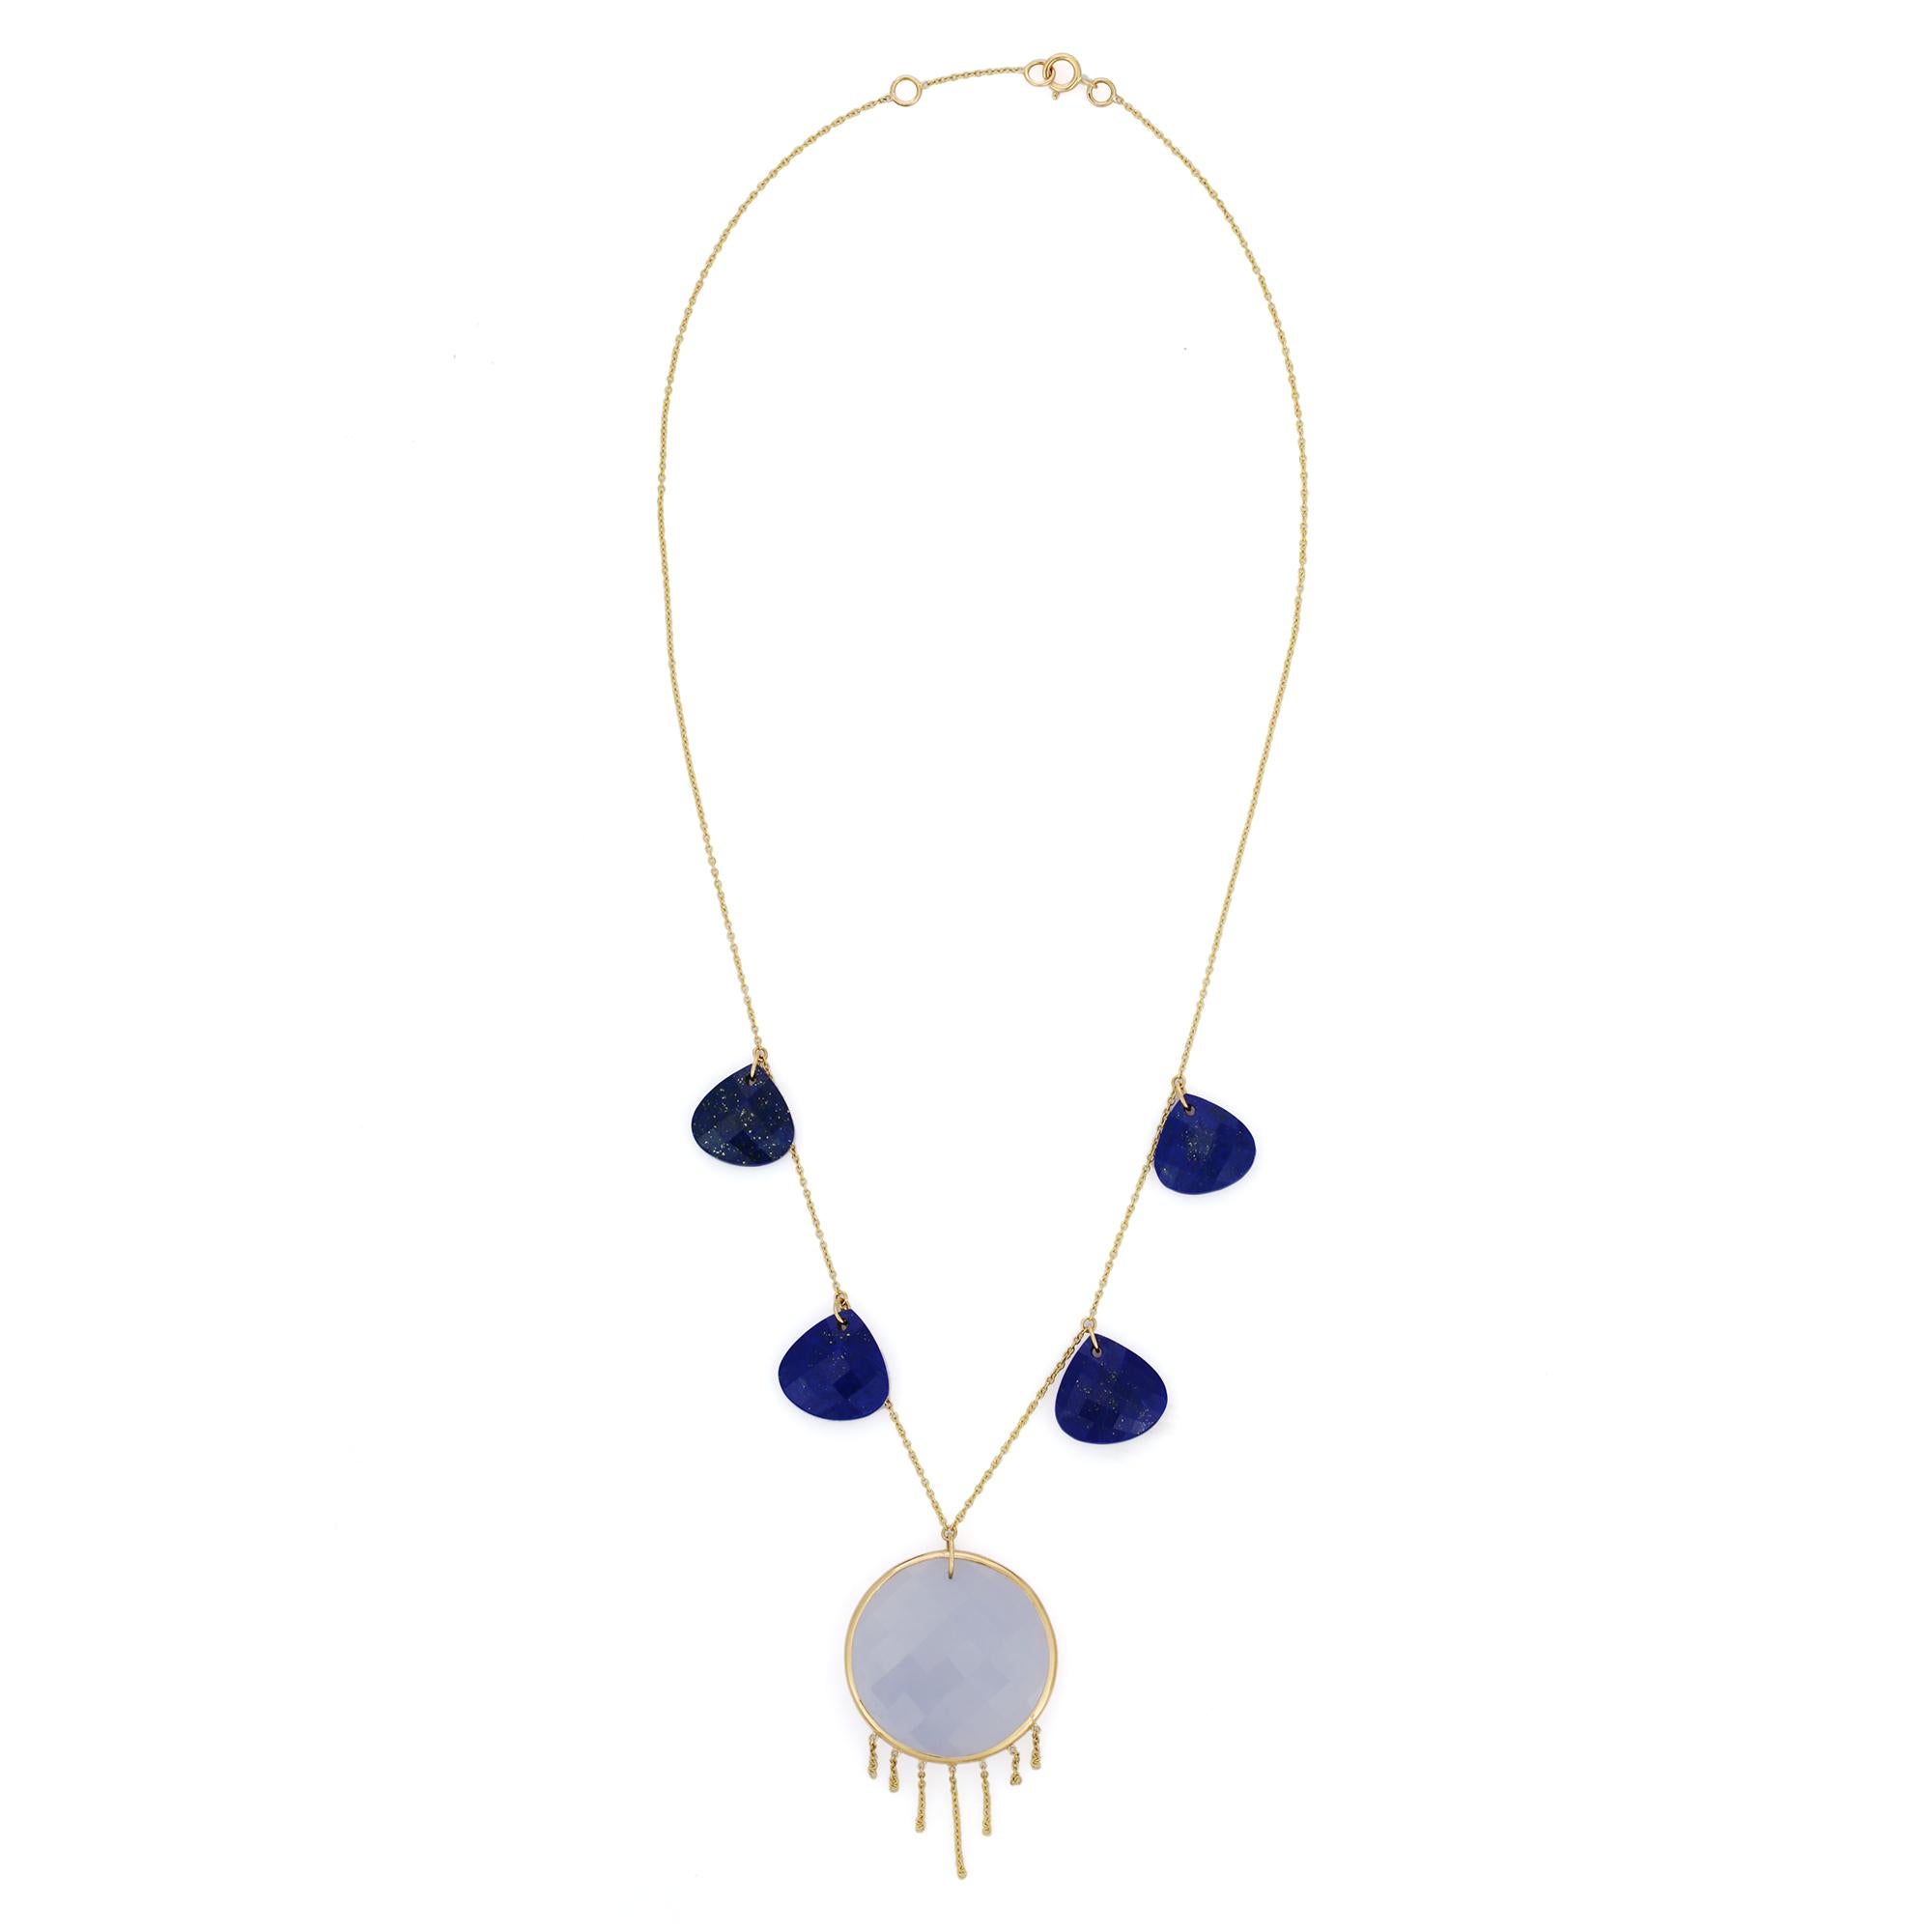 Lapis and Chalcedony Necklace in 18K Gold studded with pear and round cut pieces .
Accessorize your look with this elegant Lapis and Chalcedony pendant necklace. This stunning piece of jewelry instantly elevates a casual look or dressy outfit.